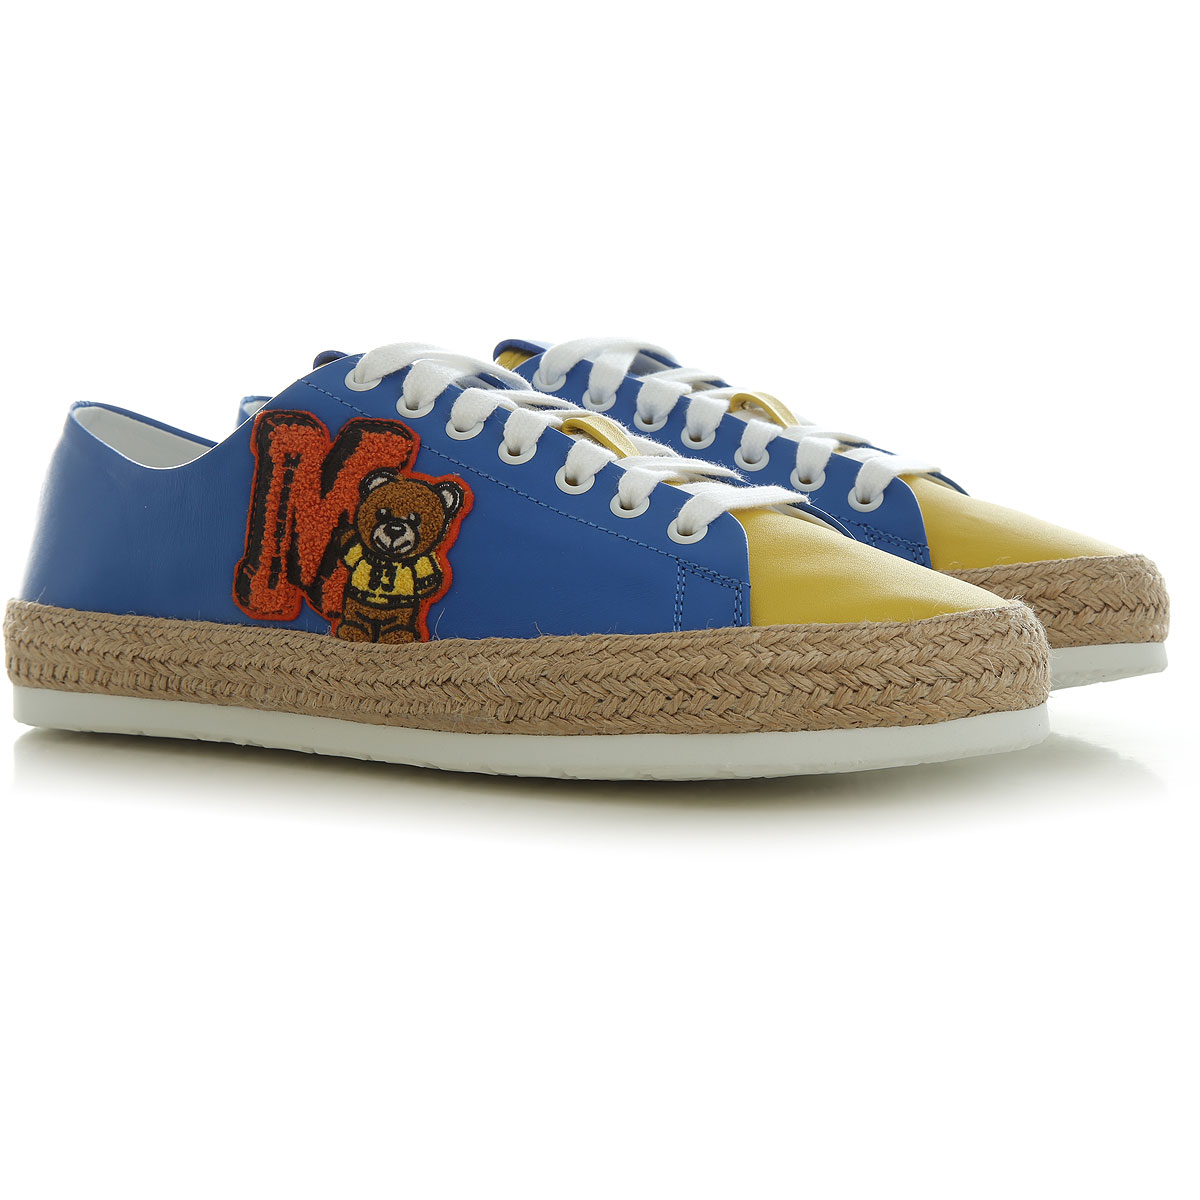 Mens Shoes Moschino, Style code: mb10313g0ega140a--